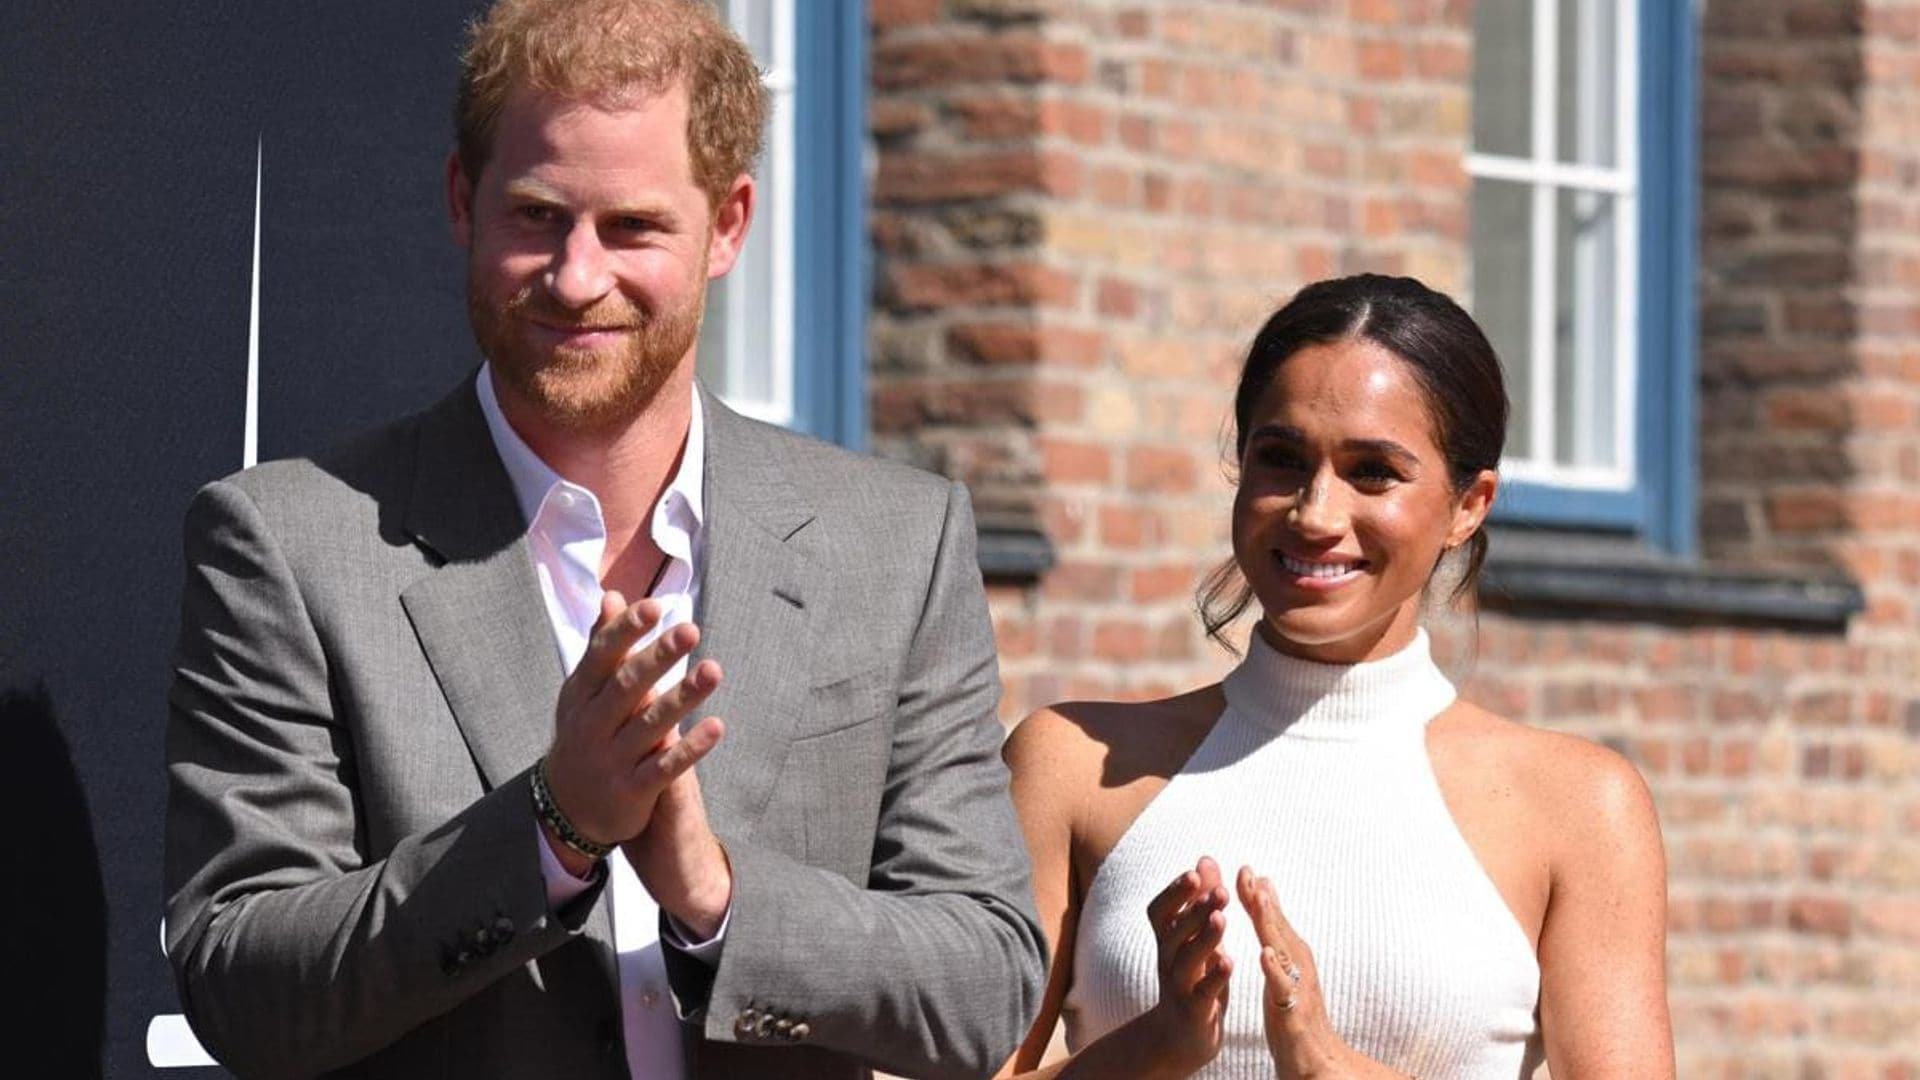 Prince Harry meets ‘Loki’ and Meghan Markle takes selfies in Germany: All the best photos